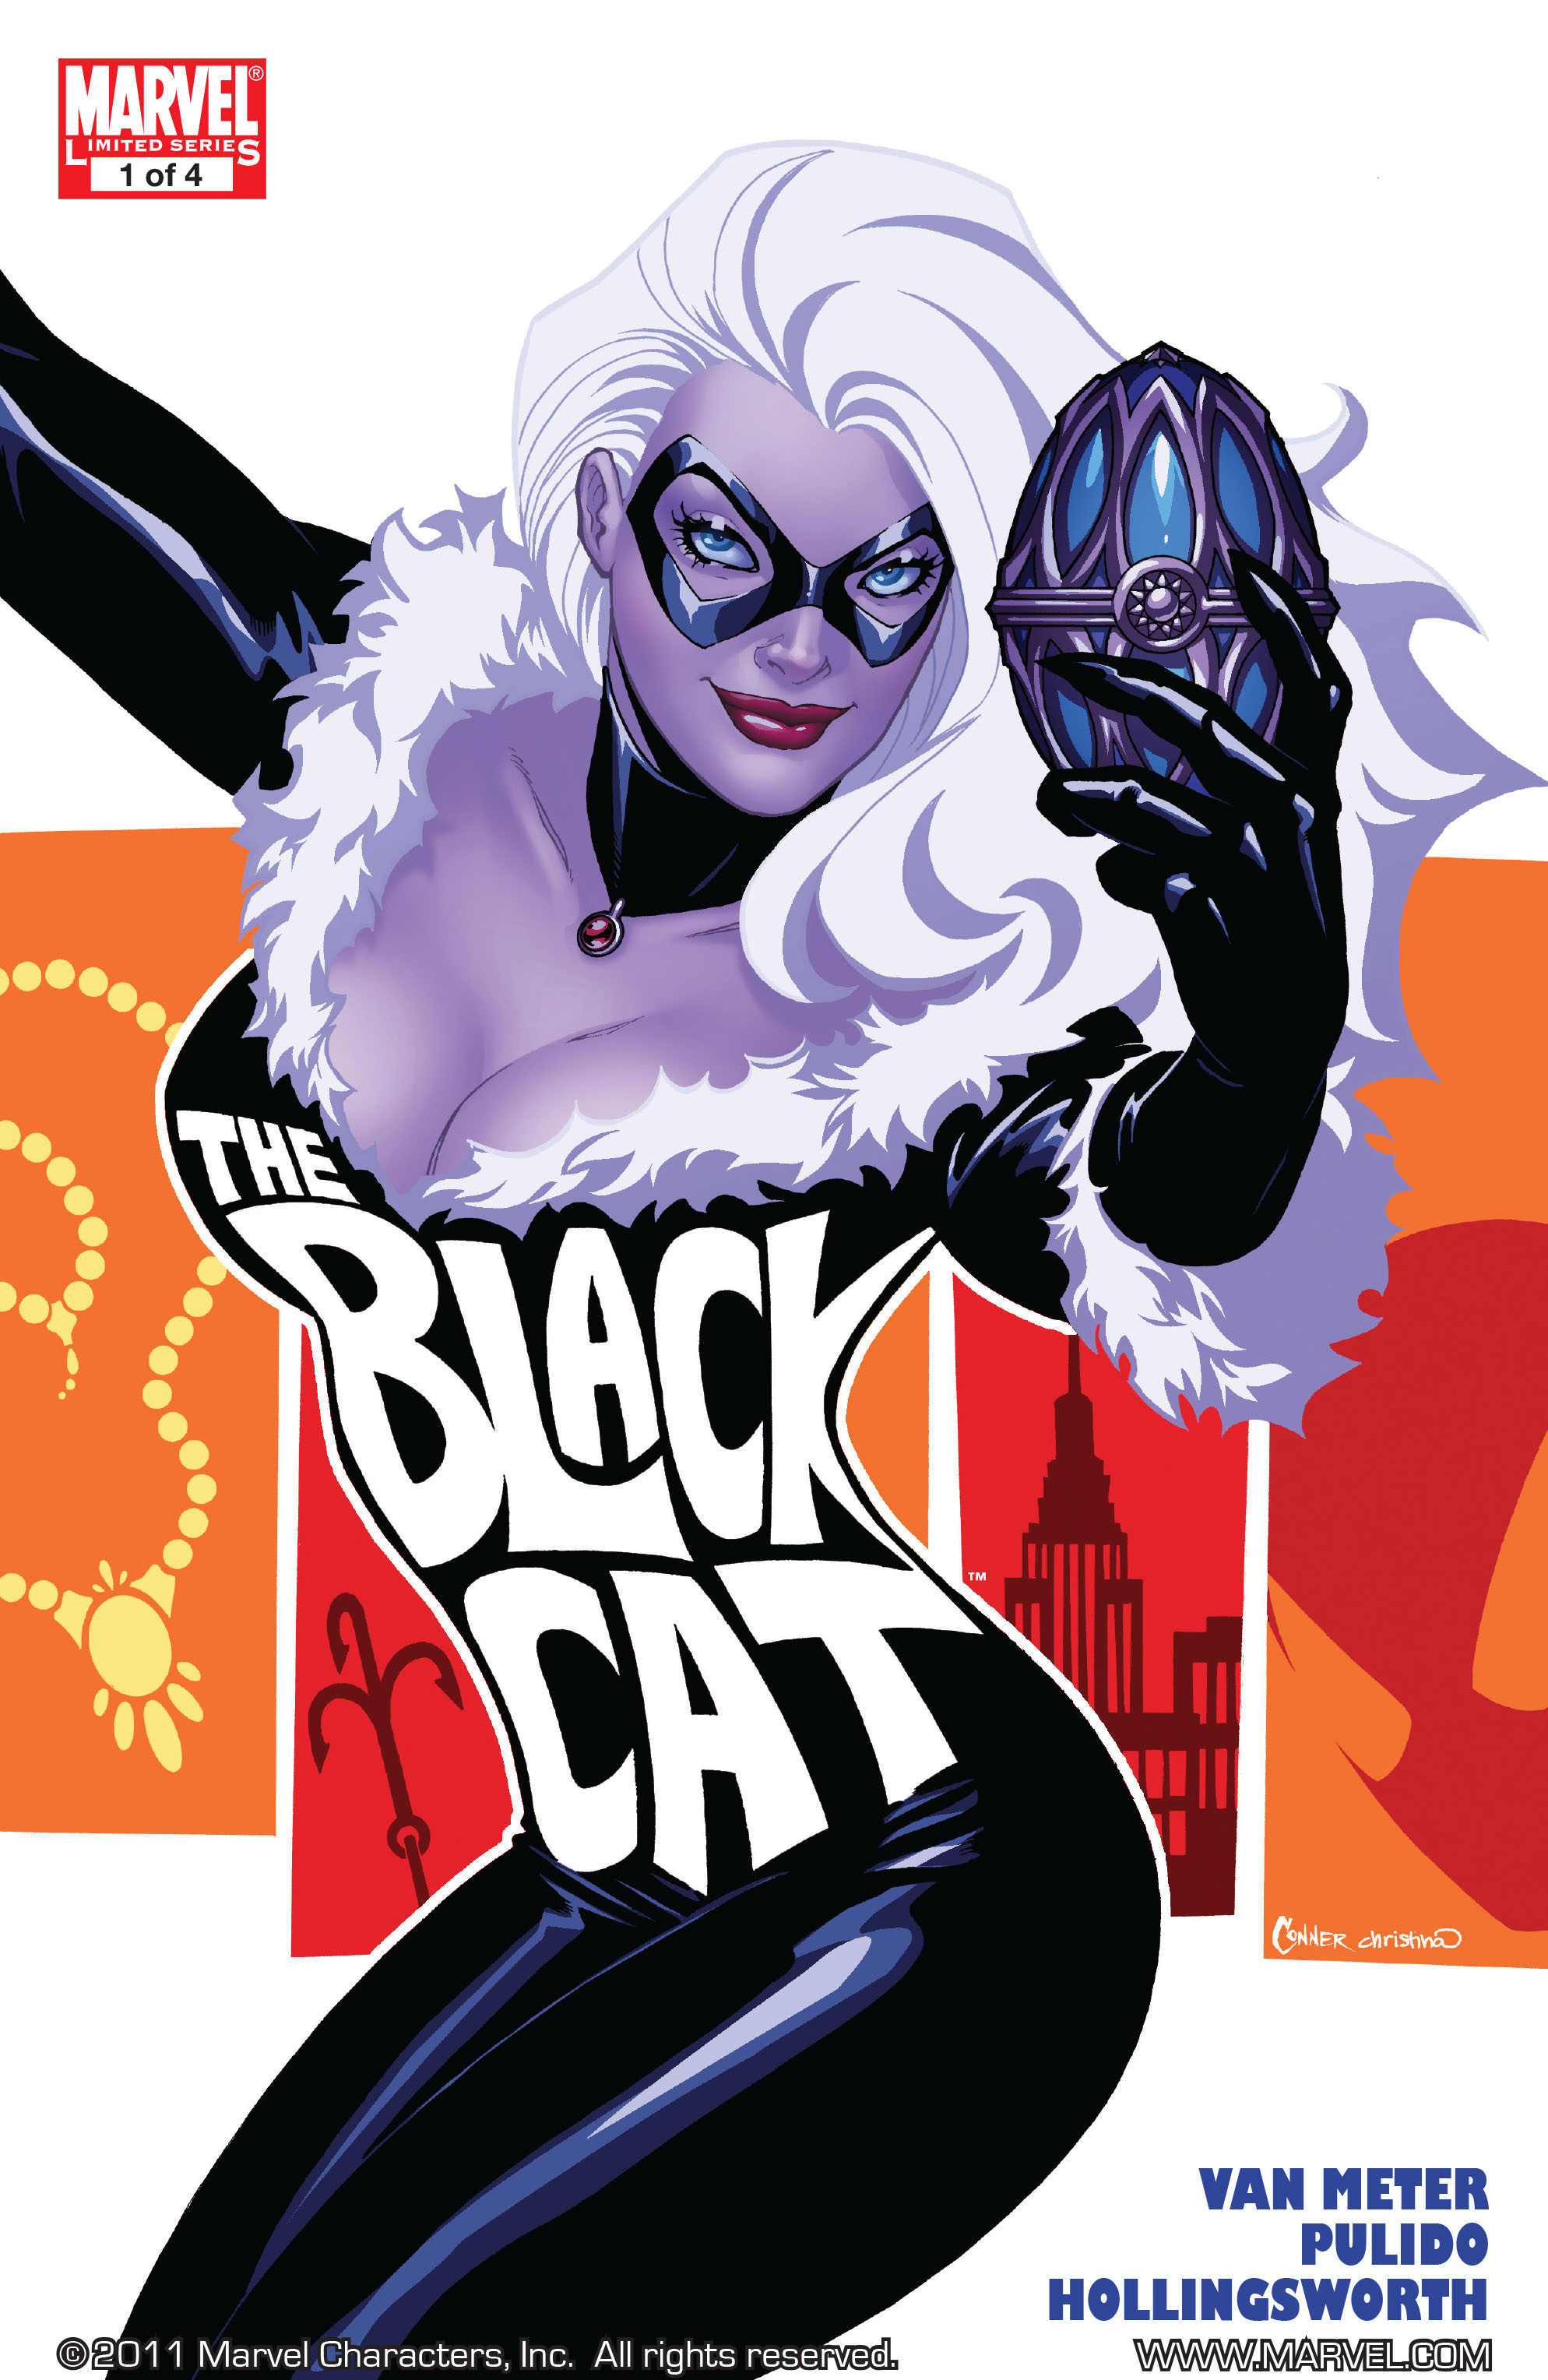 Punisher And Black Cat Porn - Spider Man Black Cat Tpb | Read Spider Man Black Cat Tpb comic online in  high quality. Read Full Comic online for free - Read comics online in high  quality .